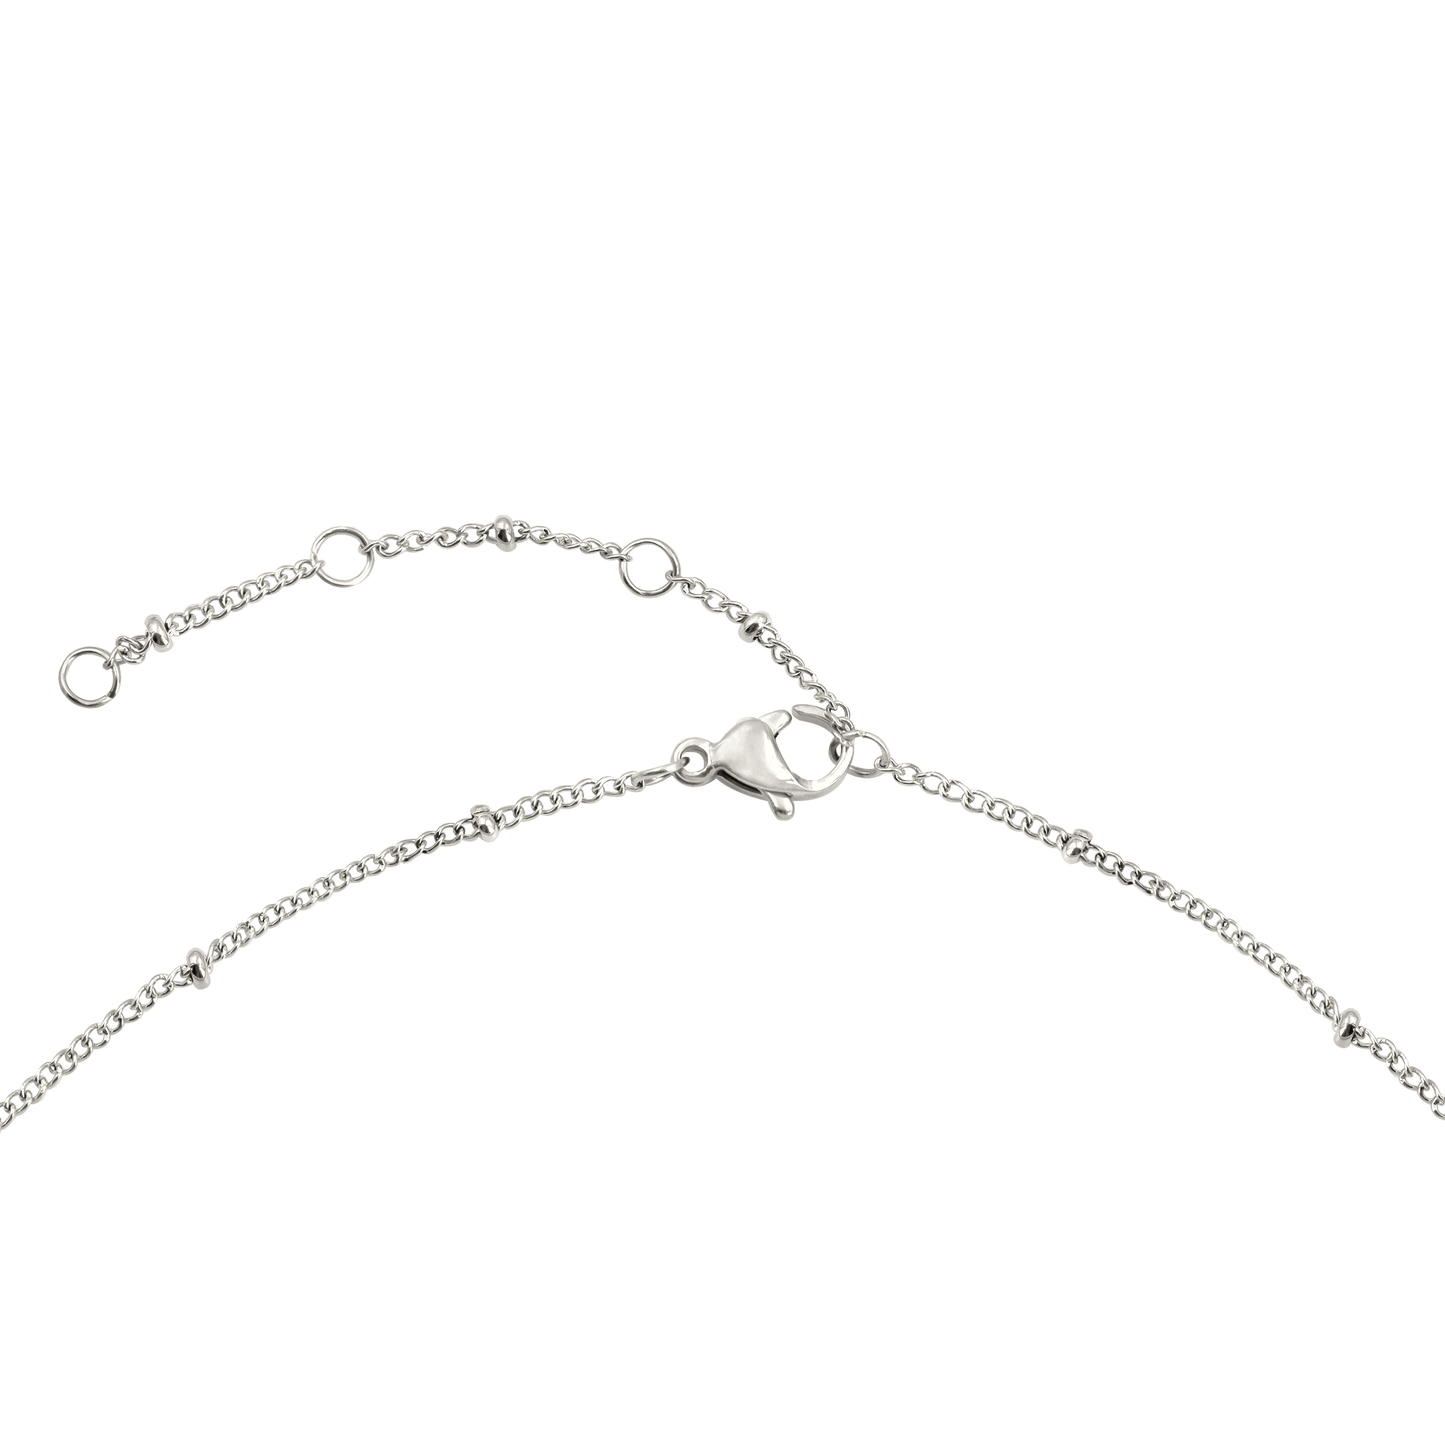 Sparkling Eyes Necklace Silver